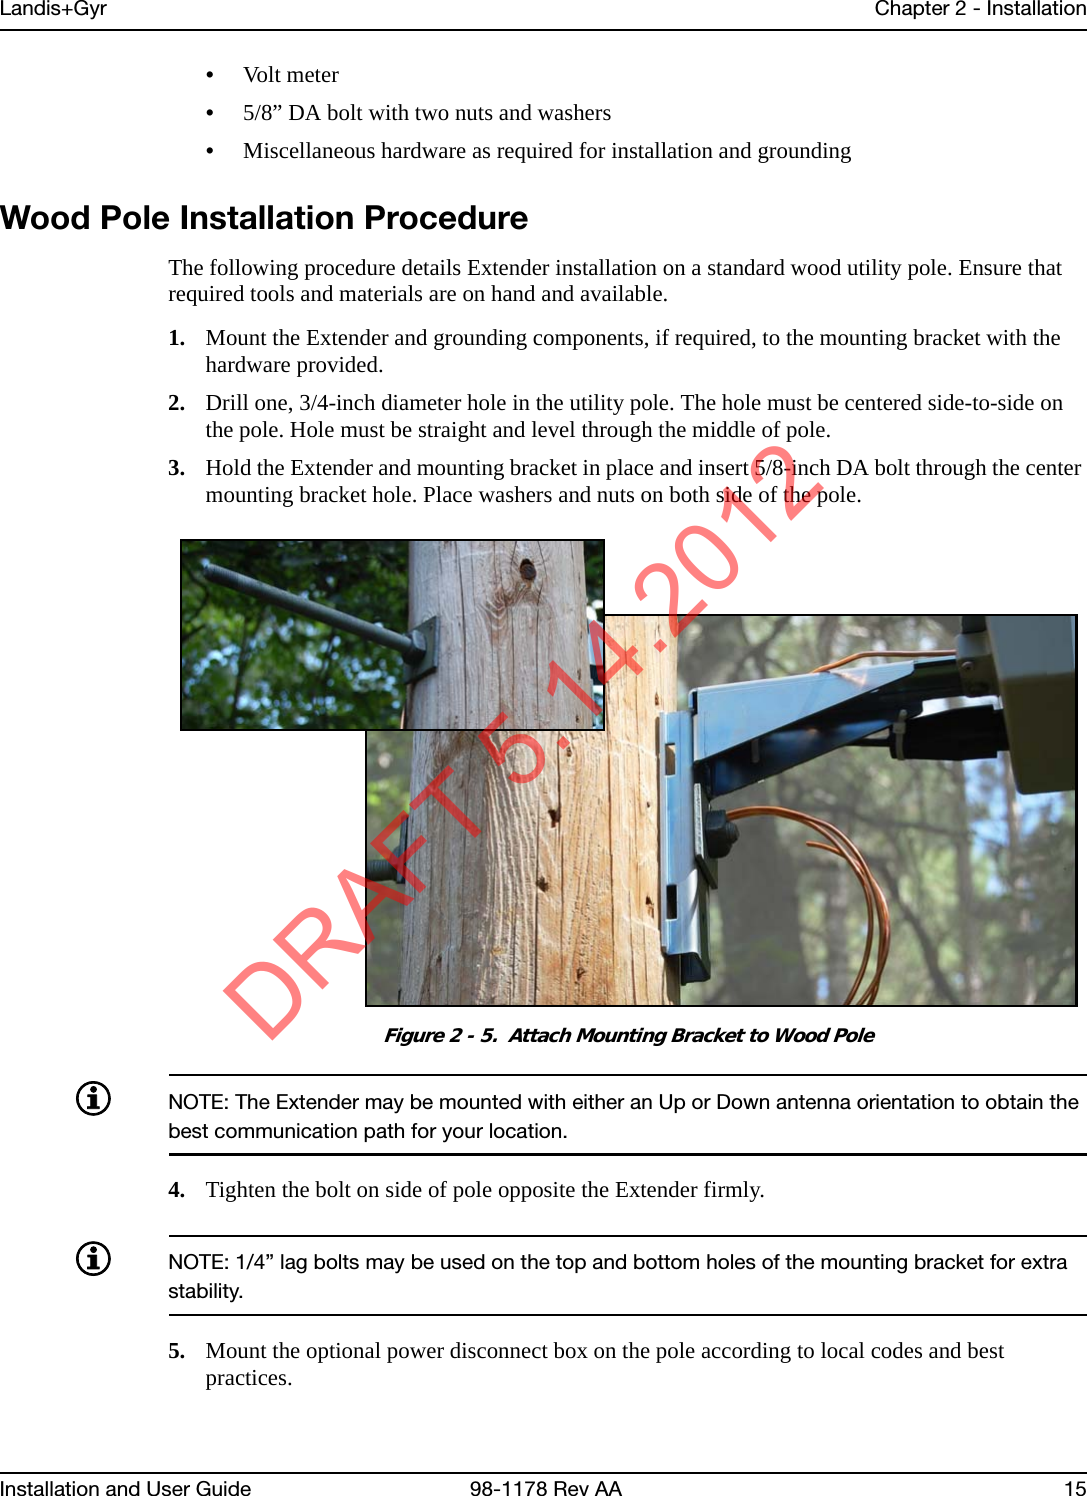 Landis+Gyr Chapter 2 - InstallationInstallation and User Guide  98-1178 Rev AA 15•Volt meter•5/8” DA bolt with two nuts and washers•Miscellaneous hardware as required for installation and groundingWood Pole Installation ProcedureThe following procedure details Extender installation on a standard wood utility pole. Ensure that required tools and materials are on hand and available.1. Mount the Extender and grounding components, if required, to the mounting bracket with the hardware provided.2. Drill one, 3/4-inch diameter hole in the utility pole. The hole must be centered side-to-side on the pole. Hole must be straight and level through the middle of pole.3. Hold the Extender and mounting bracket in place and insert 5/8-inch DA bolt through the center mounting bracket hole. Place washers and nuts on both side of the pole.Figure 2 - 5.  Attach Mounting Bracket to Wood PoleNOTE: The Extender may be mounted with either an Up or Down antenna orientation to obtain the best communication path for your location. 4. Tighten the bolt on side of pole opposite the Extender firmly.NOTE: 1/4” lag bolts may be used on the top and bottom holes of the mounting bracket for extra stability.5. Mount the optional power disconnect box on the pole according to local codes and best practices.DRAFT 5.14.2012